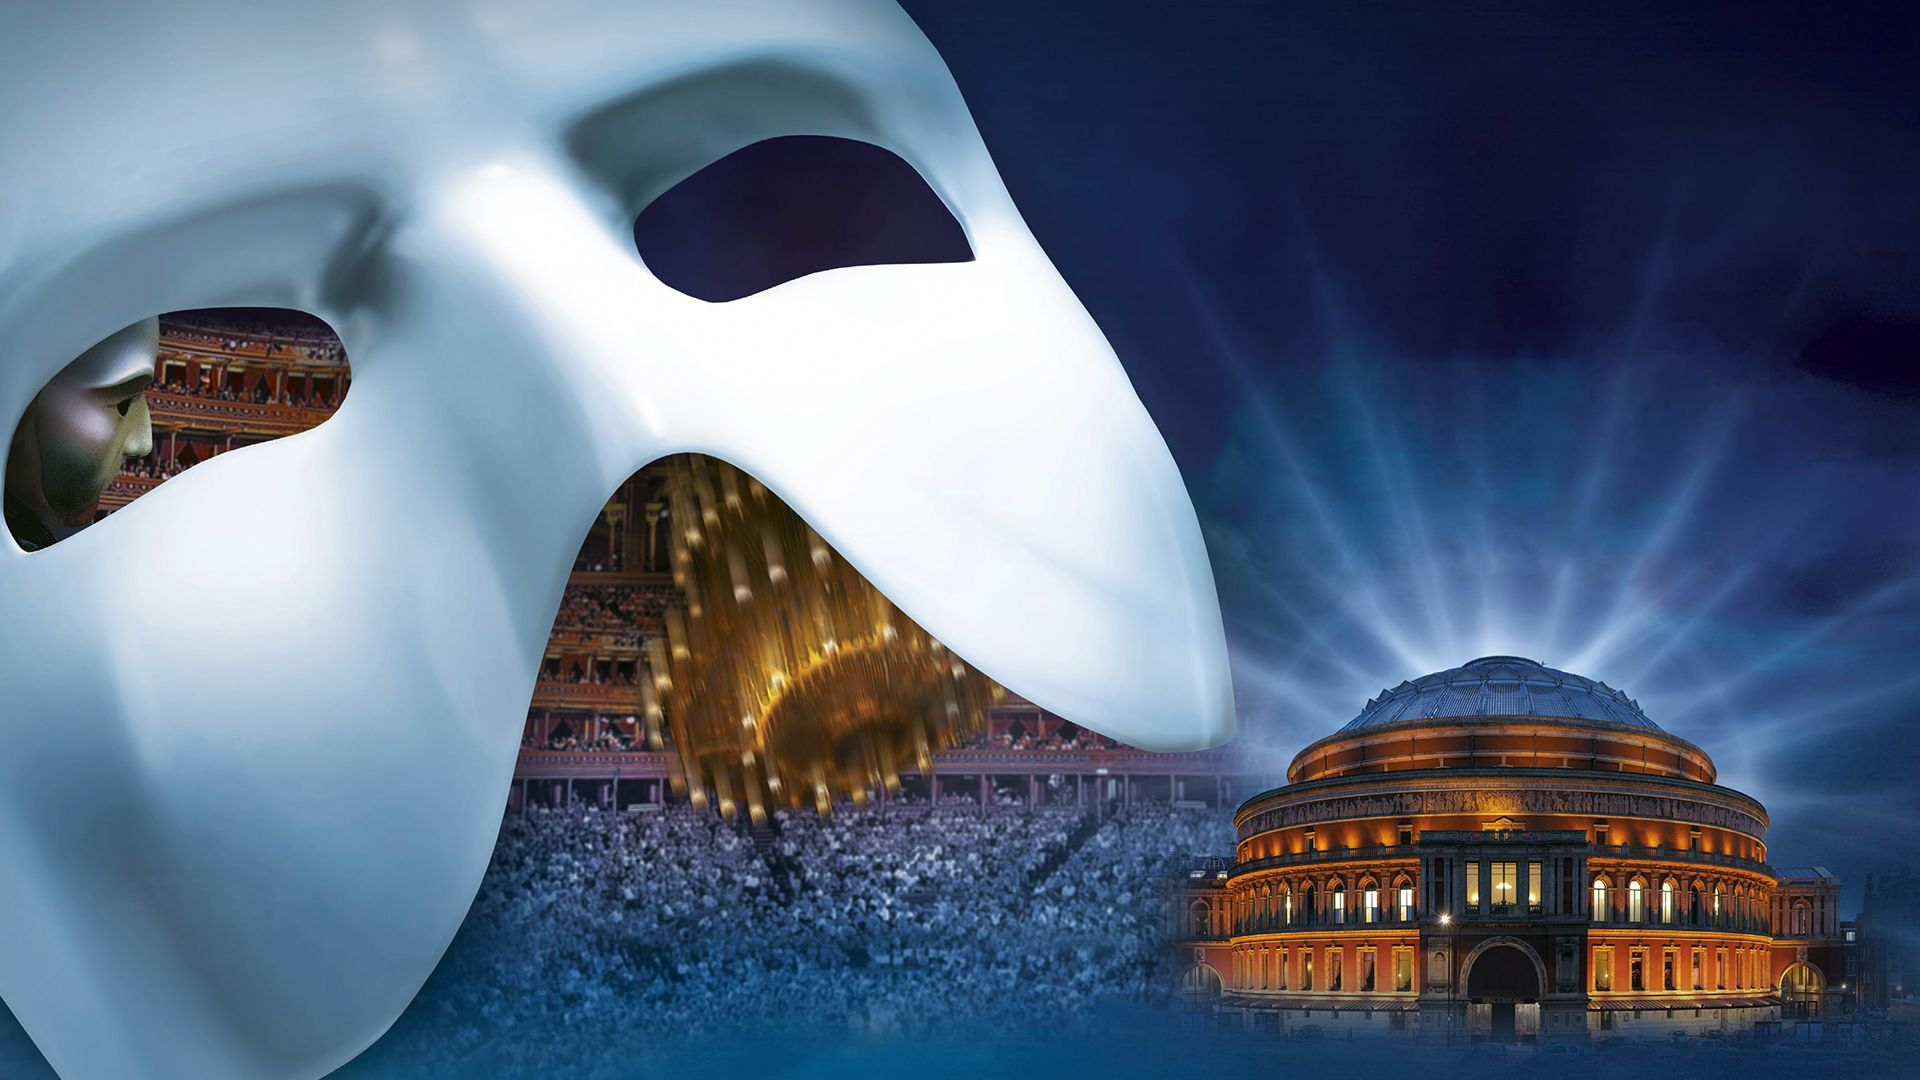 The Phantom of the Opera at the Royal Albert Hall background